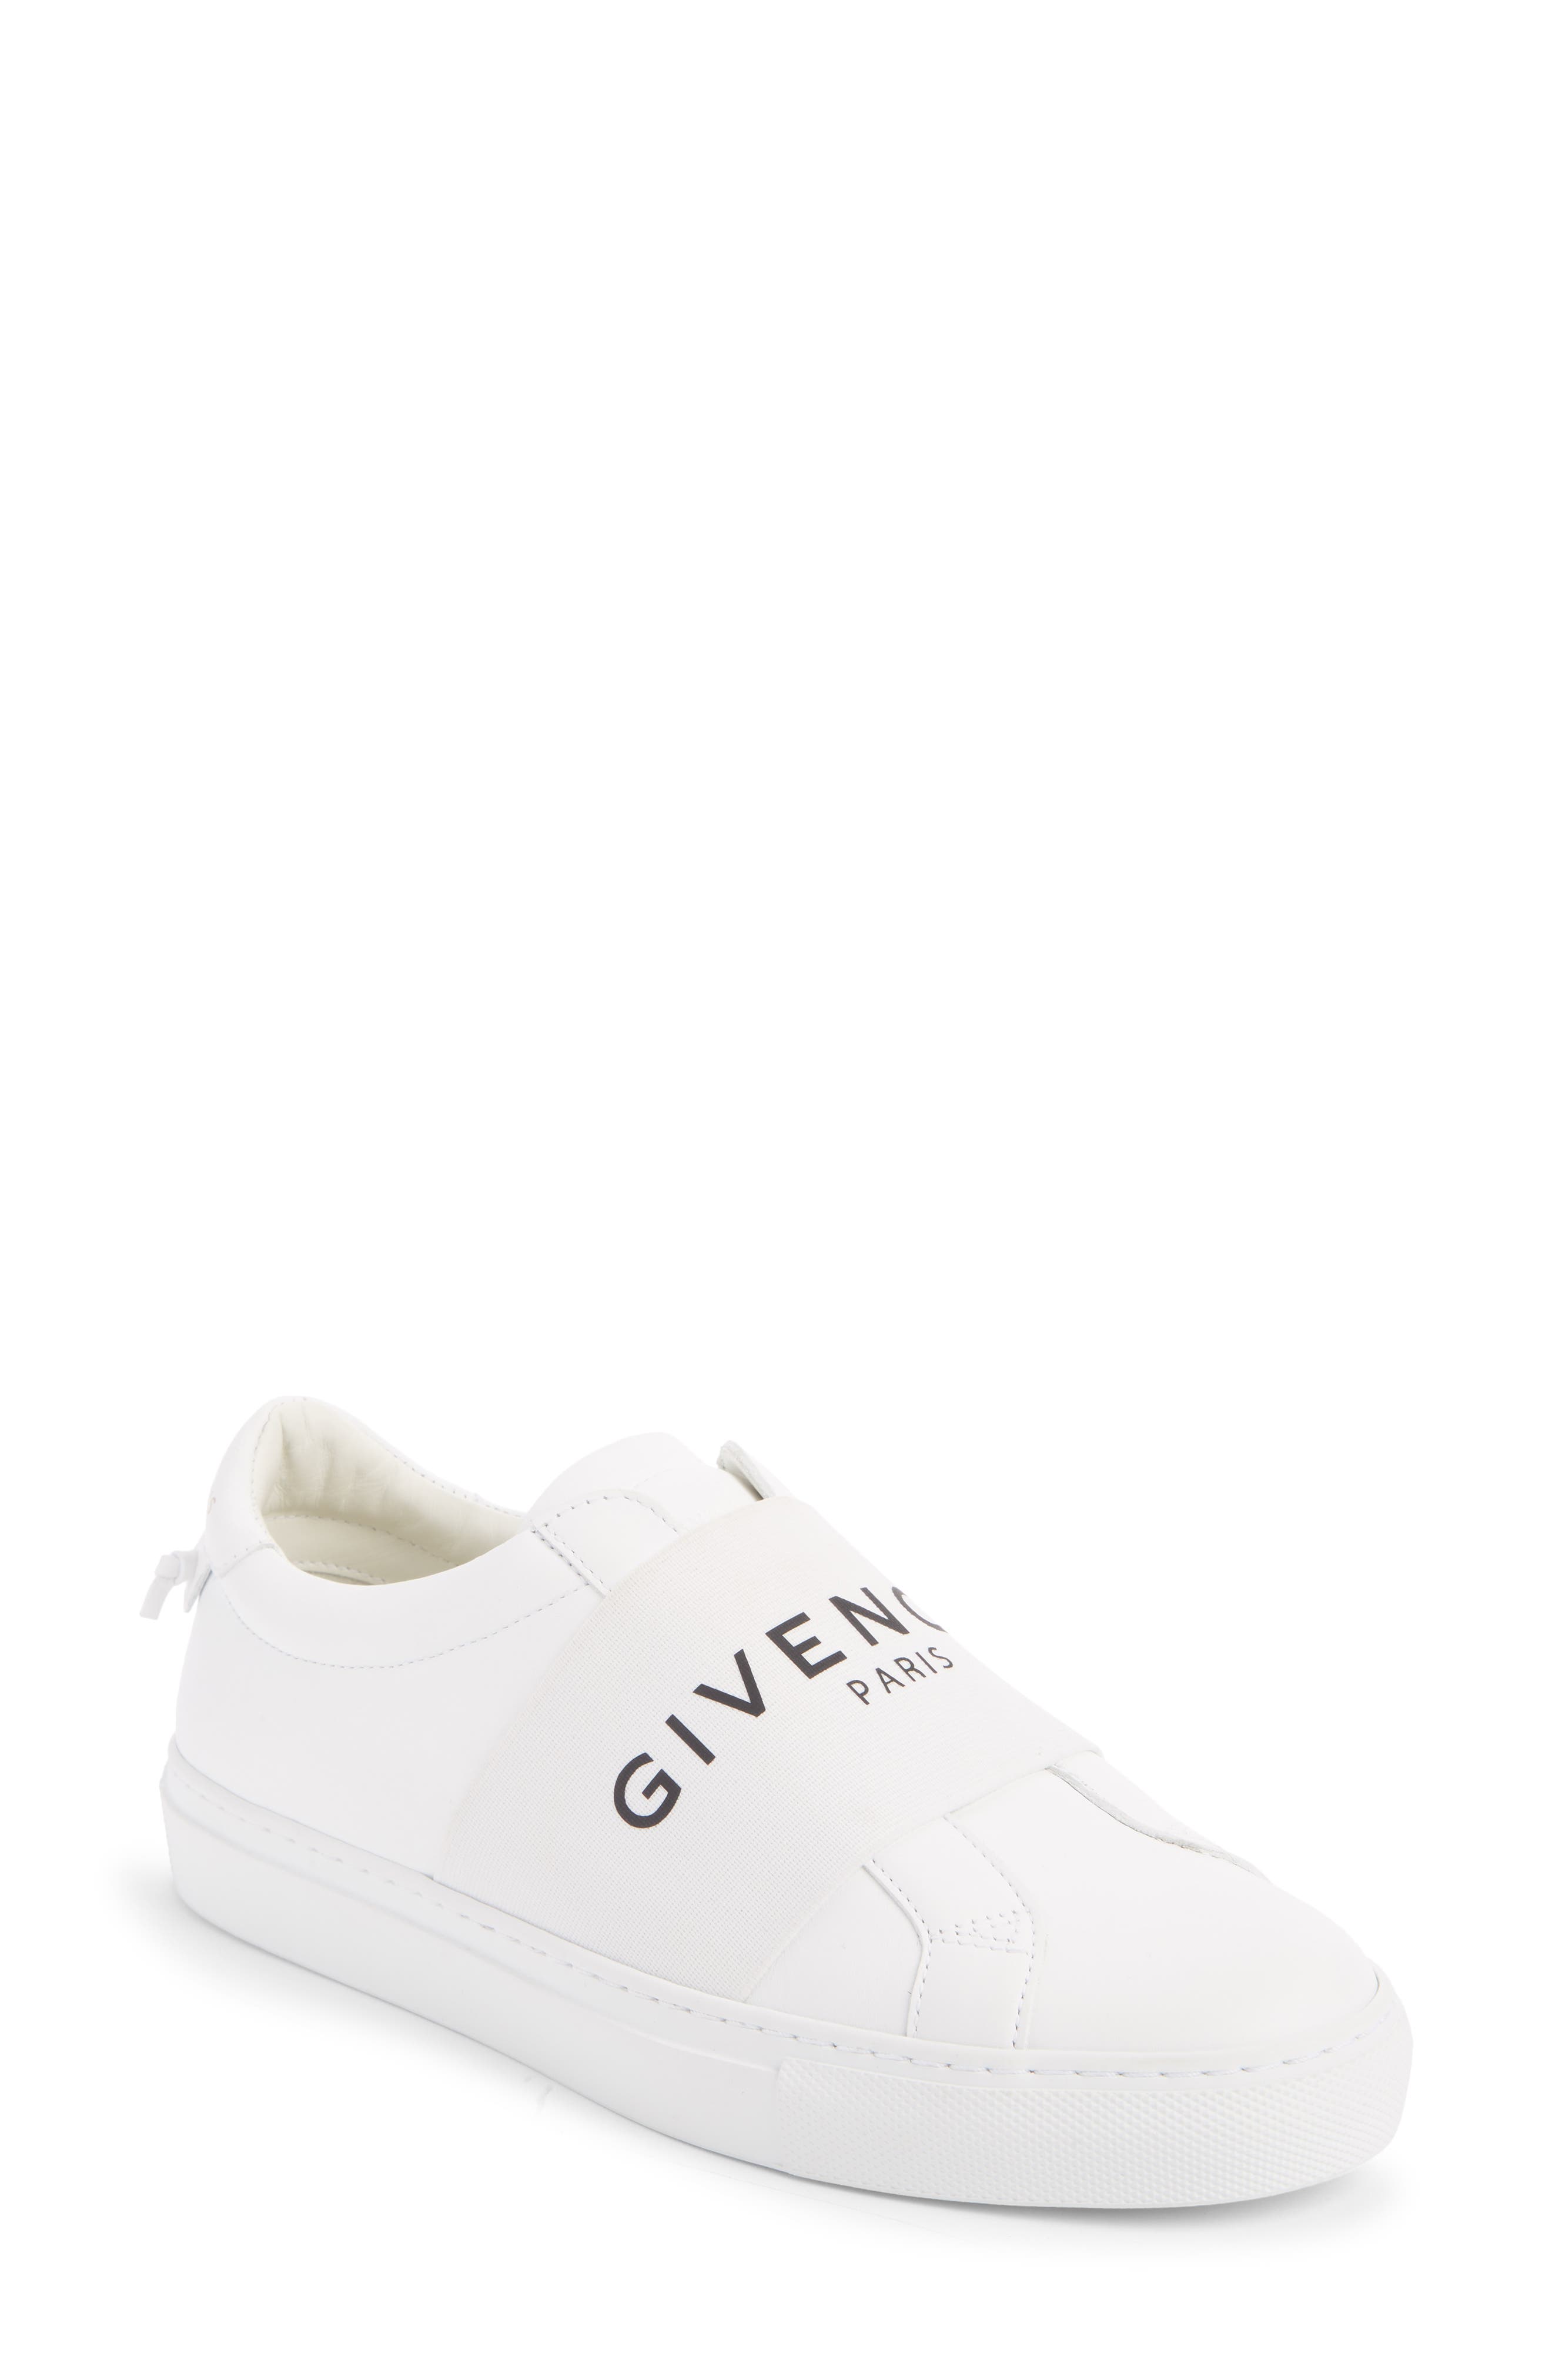 givenchy sneakers urban street